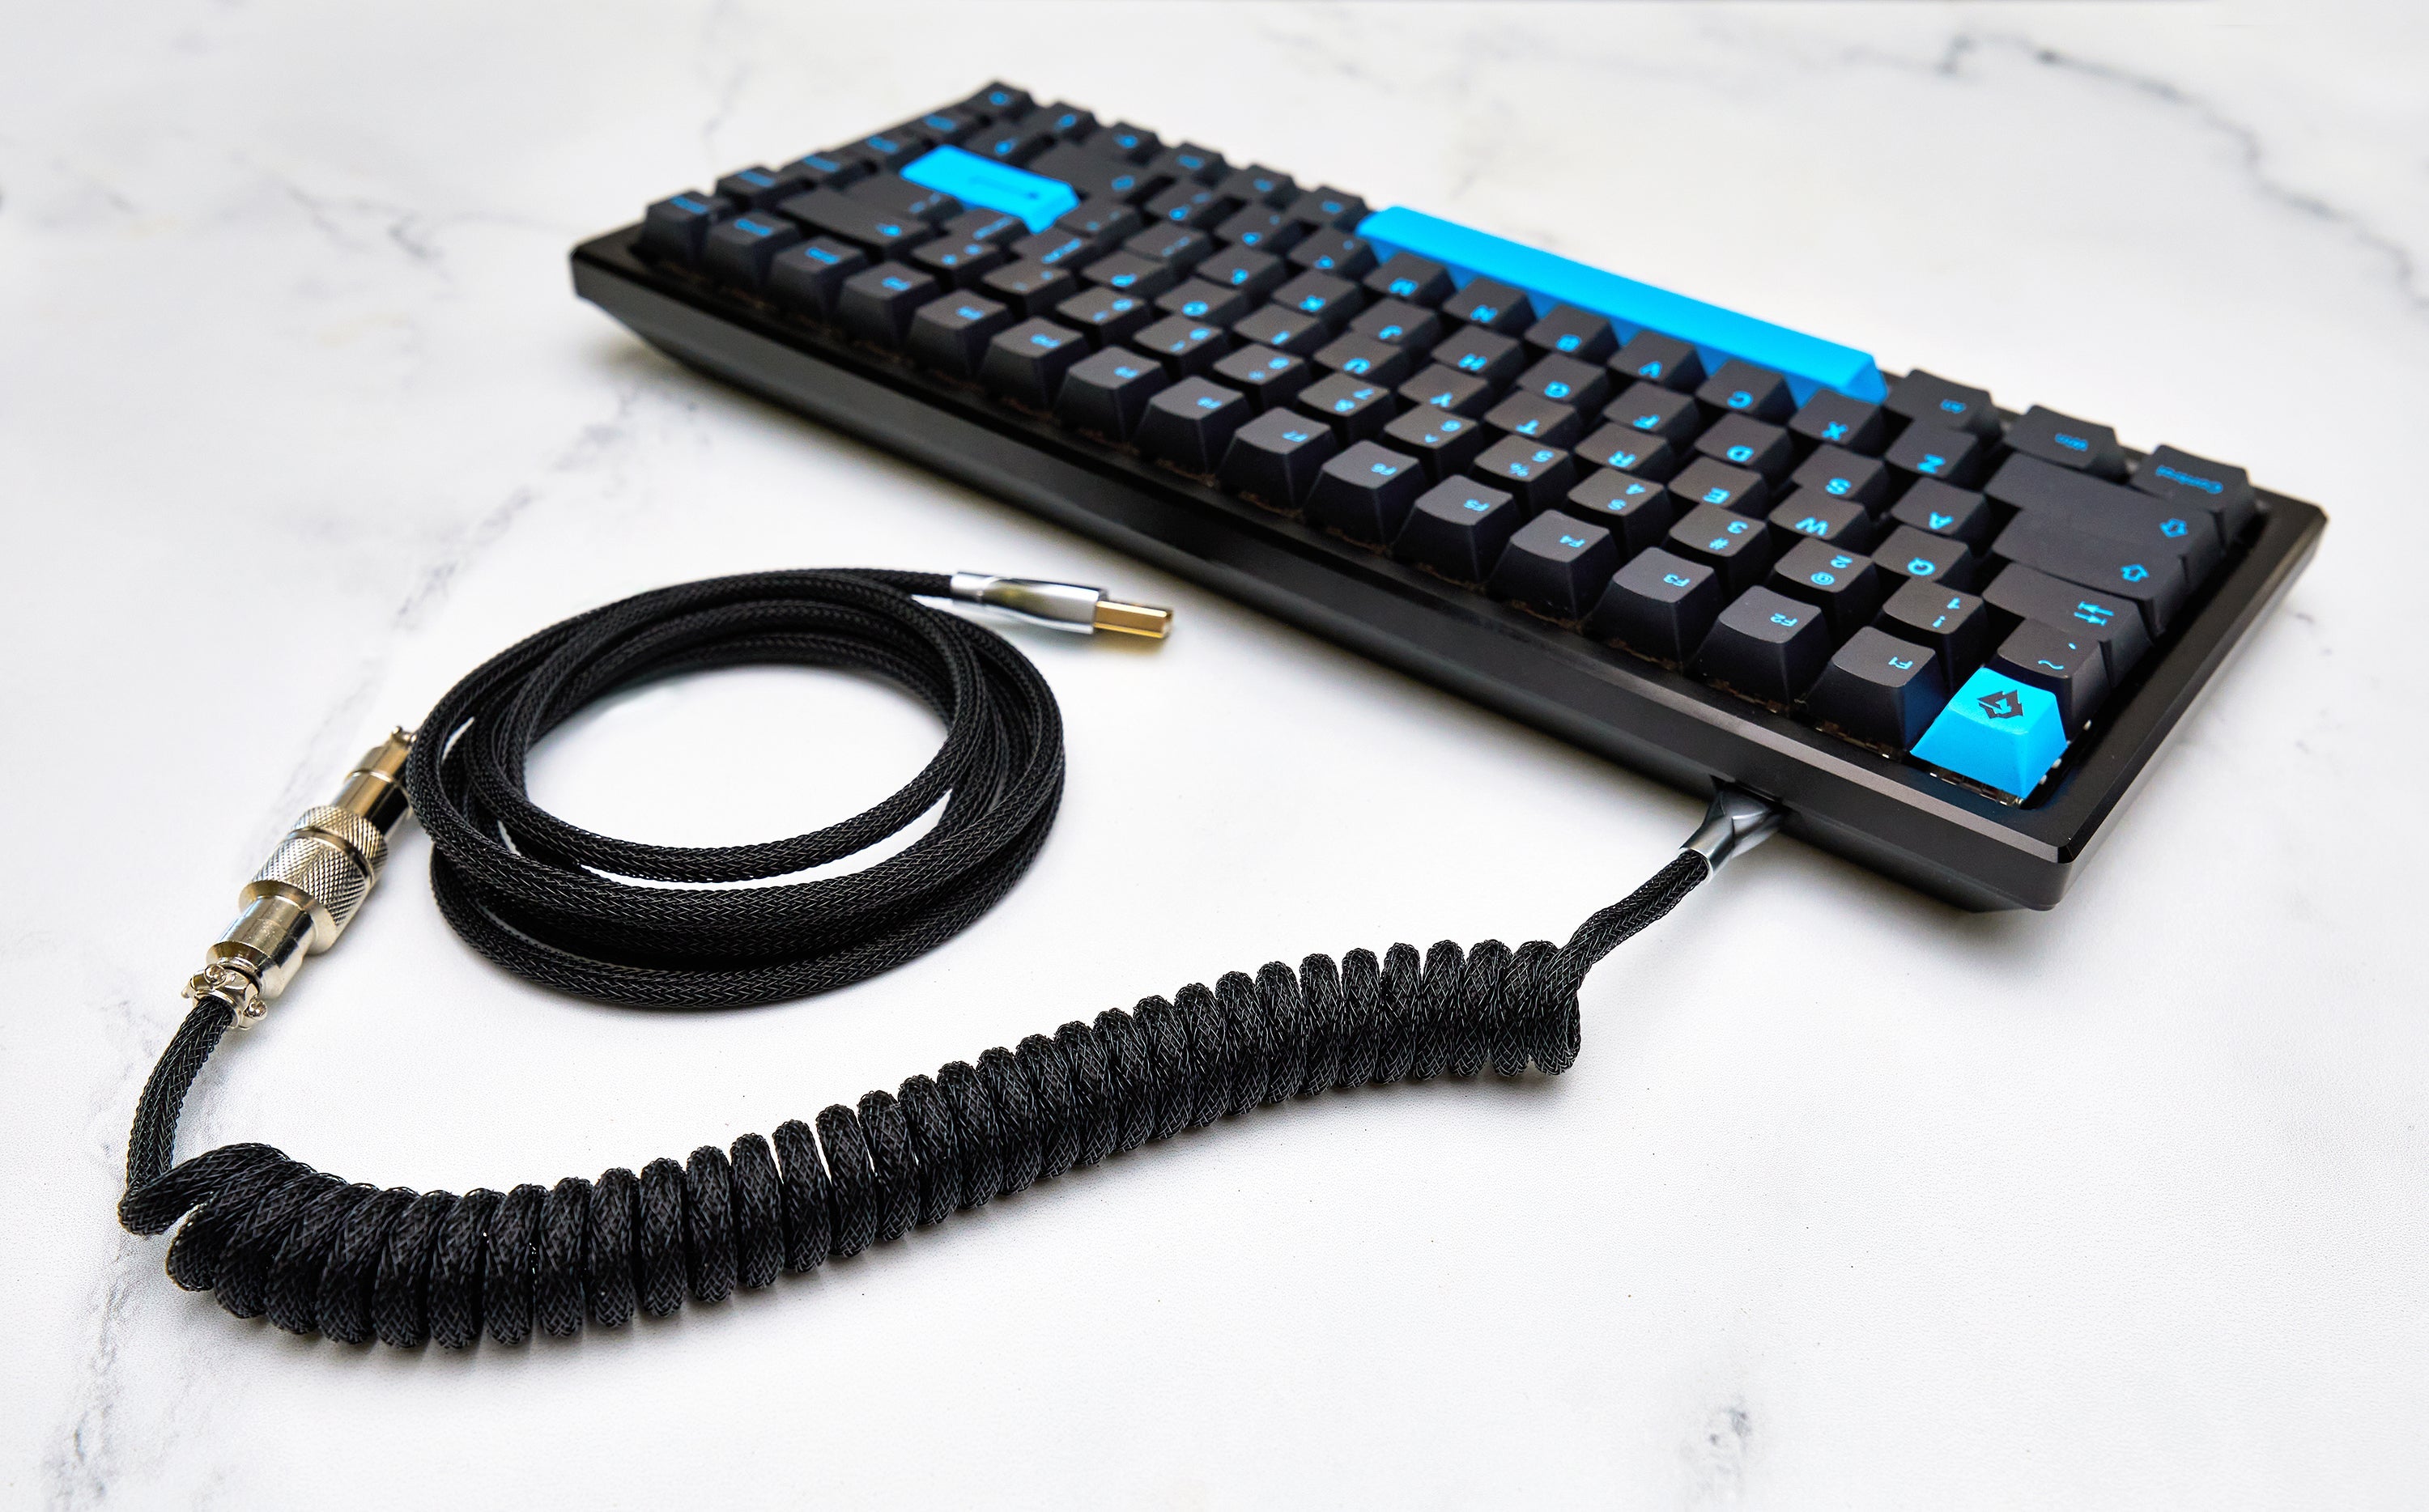 glacier elite braided premium usb cable for keyboards